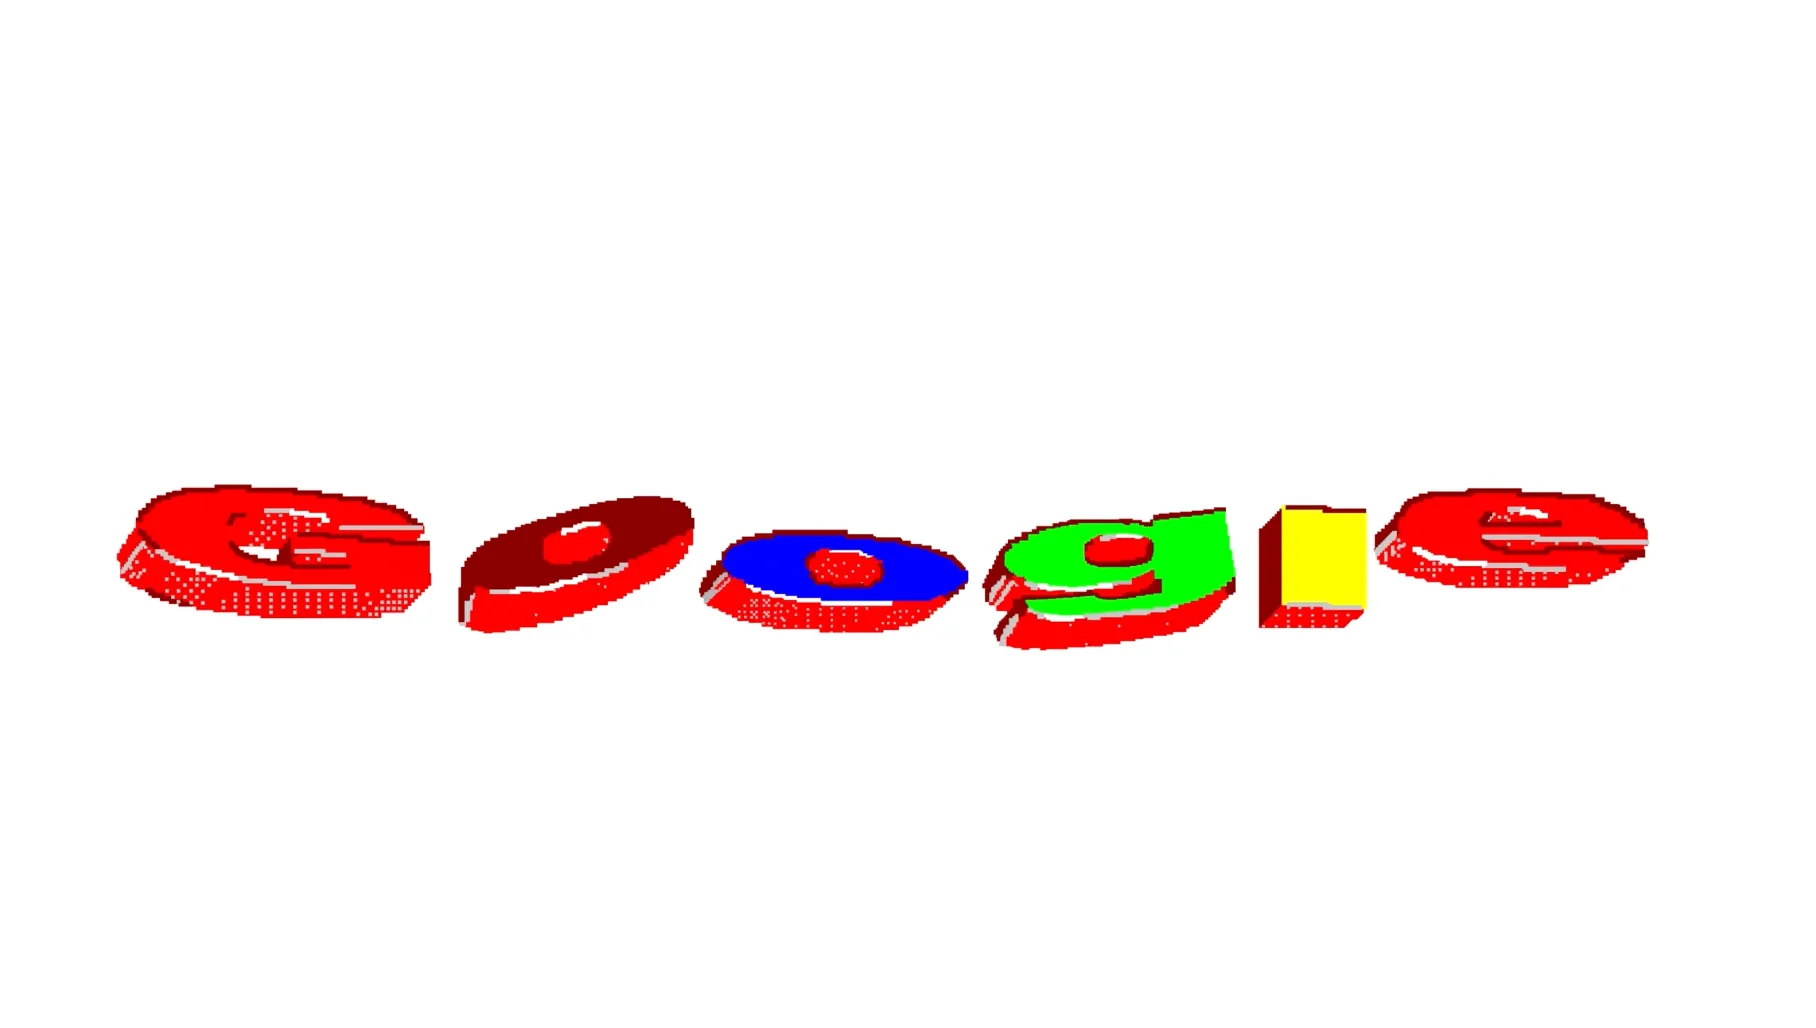 Google’s logos over the years. (Image: Google)